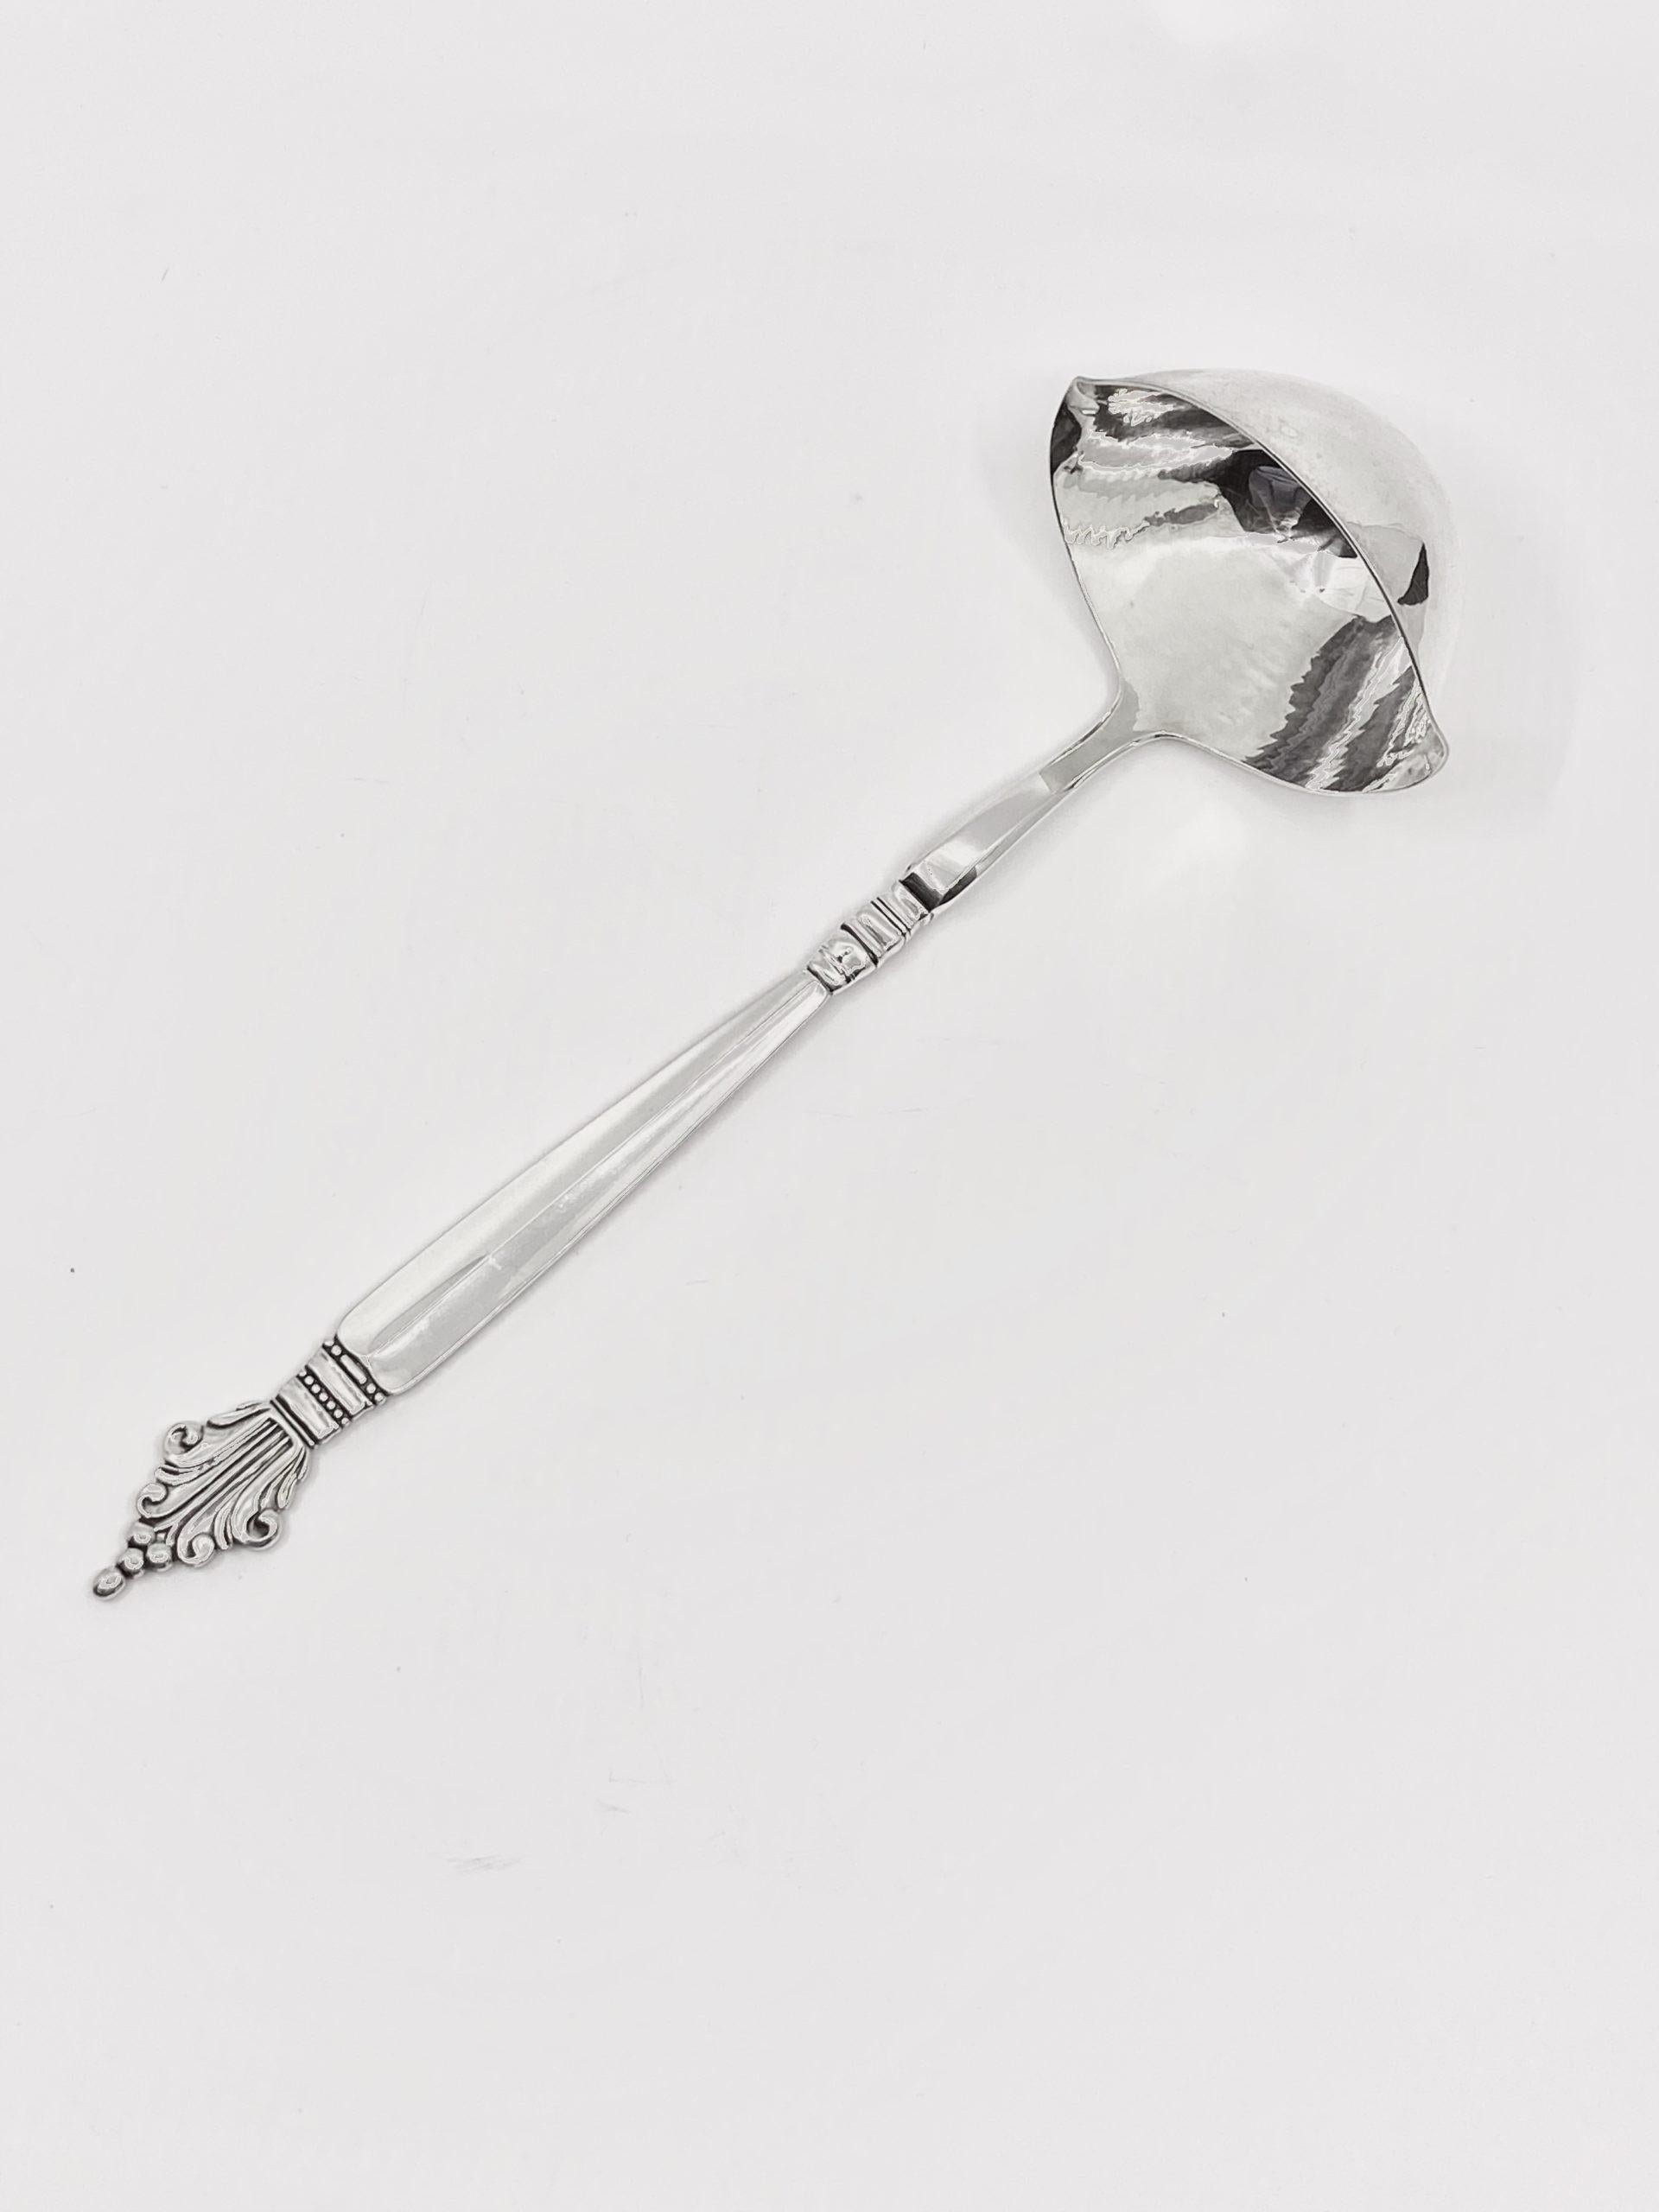 Vintage Georg Jensen sterling silver soup/punch ladle, item #152 in the Acanthus pattern, design #180 from 1917 by Johan Rohde.

Additional information:
Material: Sterling Silver
Style: Art Nouveau
Hallmarks: With Georg Jensen hallmark, made in